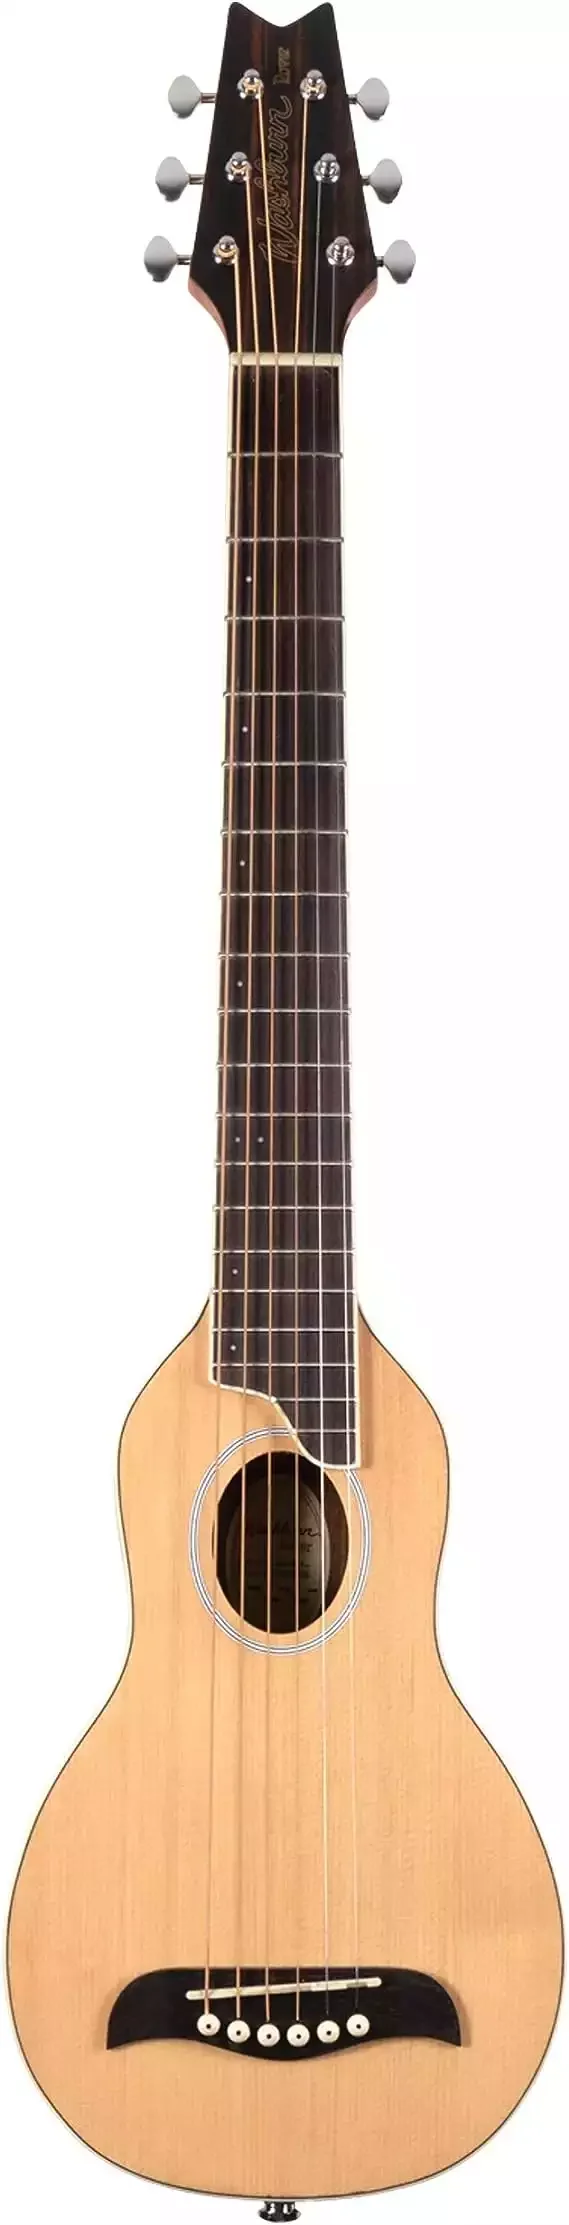 Washburn RO10 Rover Steel String Travel Acoustic Guitar